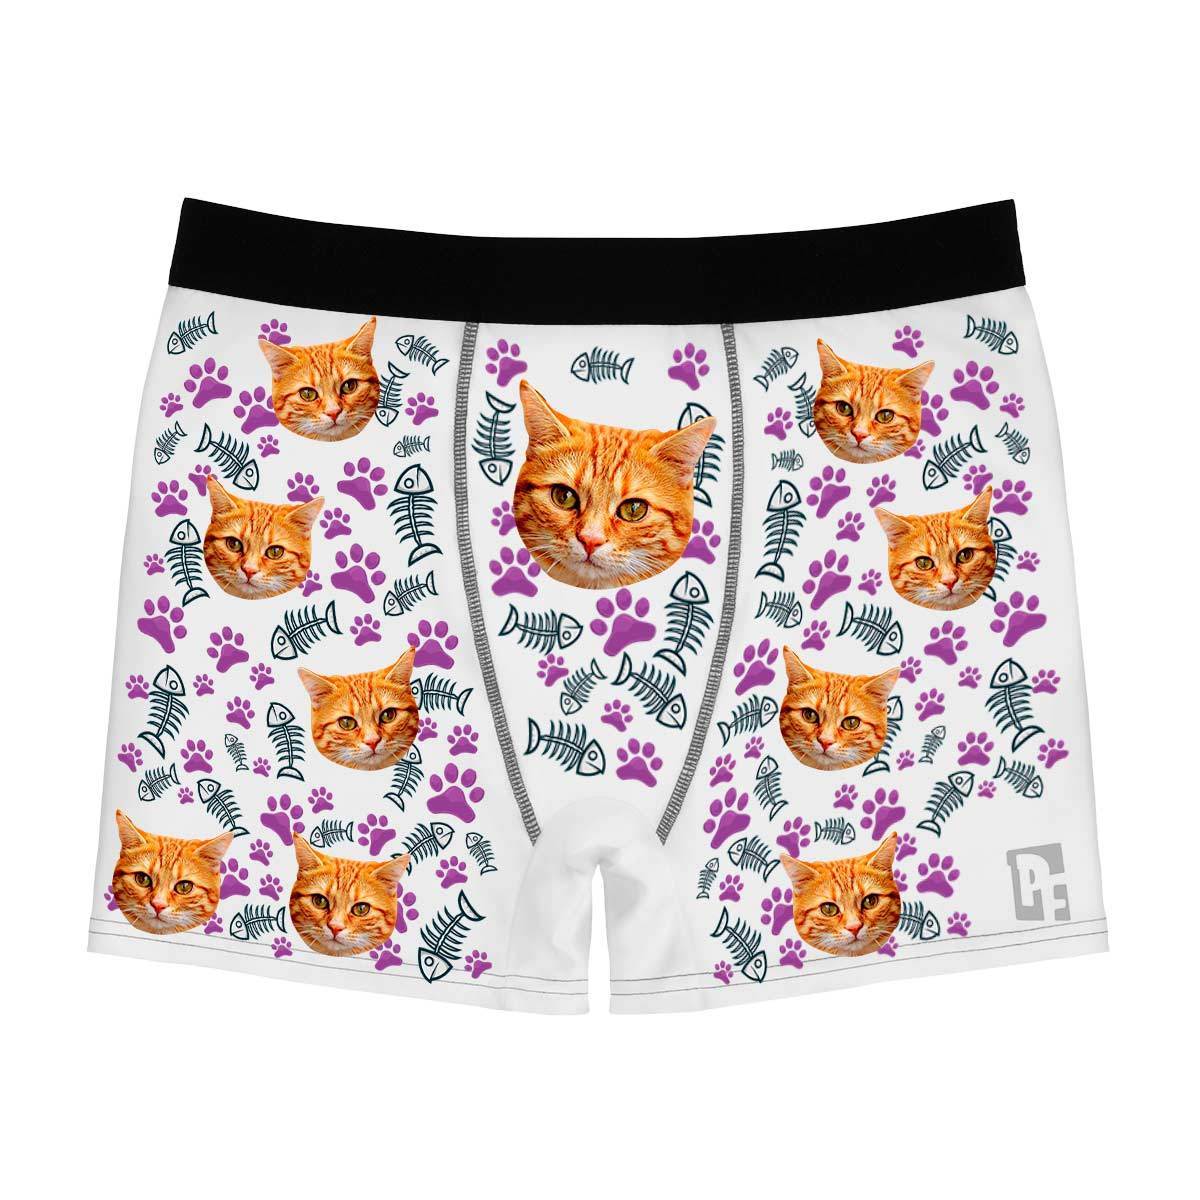 Red Cat men's boxer briefs personalized with photo printed on them